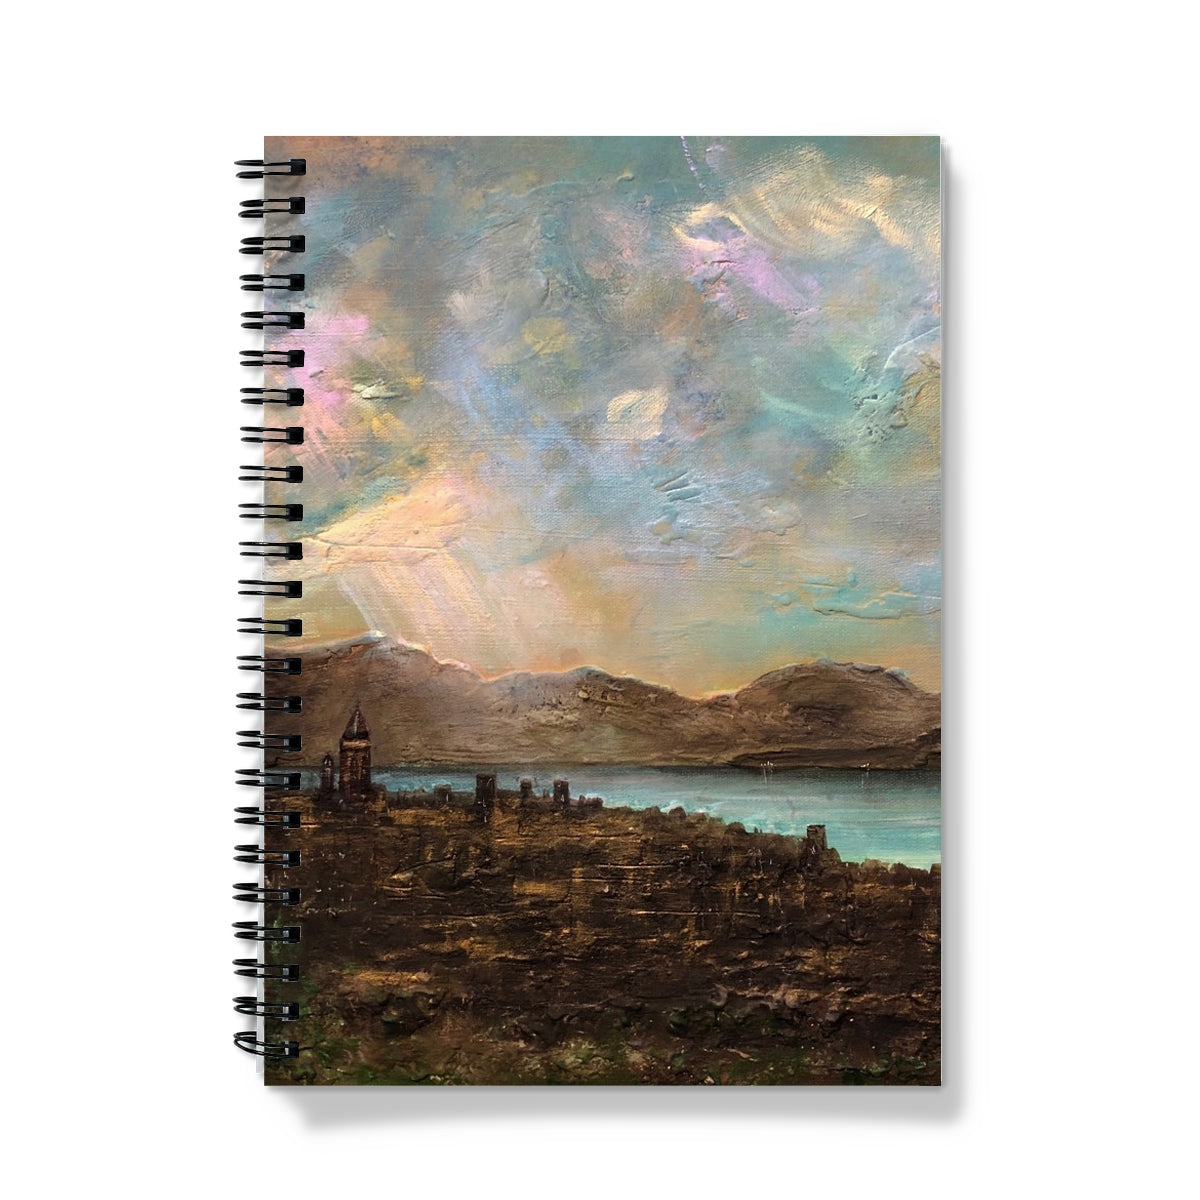 Angels Fingers Over Greenock Art Gifts Notebook-Journals & Notebooks-River Clyde Art Gallery-A4-Lined-Paintings, Prints, Homeware, Art Gifts From Scotland By Scottish Artist Kevin Hunter